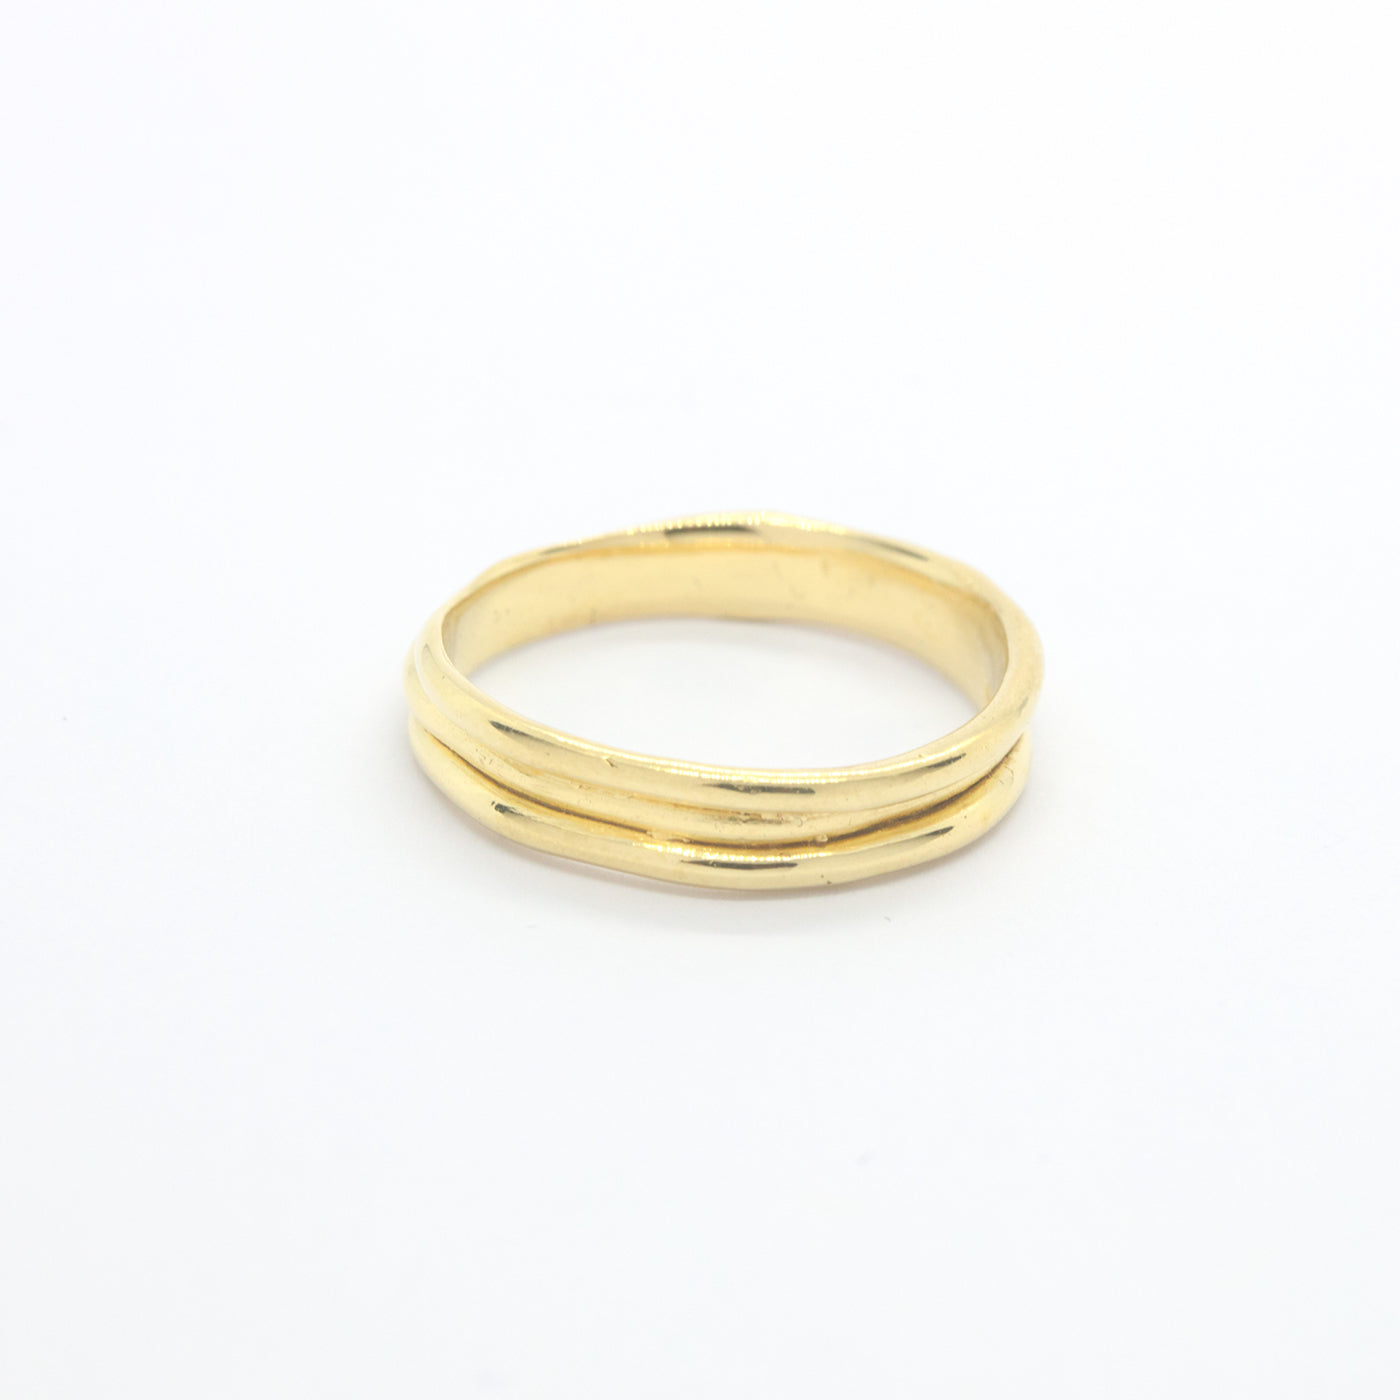 Ring Embrace Wedding Band for Him 14ct or 18ct yellow gold product view innan jewellery independent atelier berlin